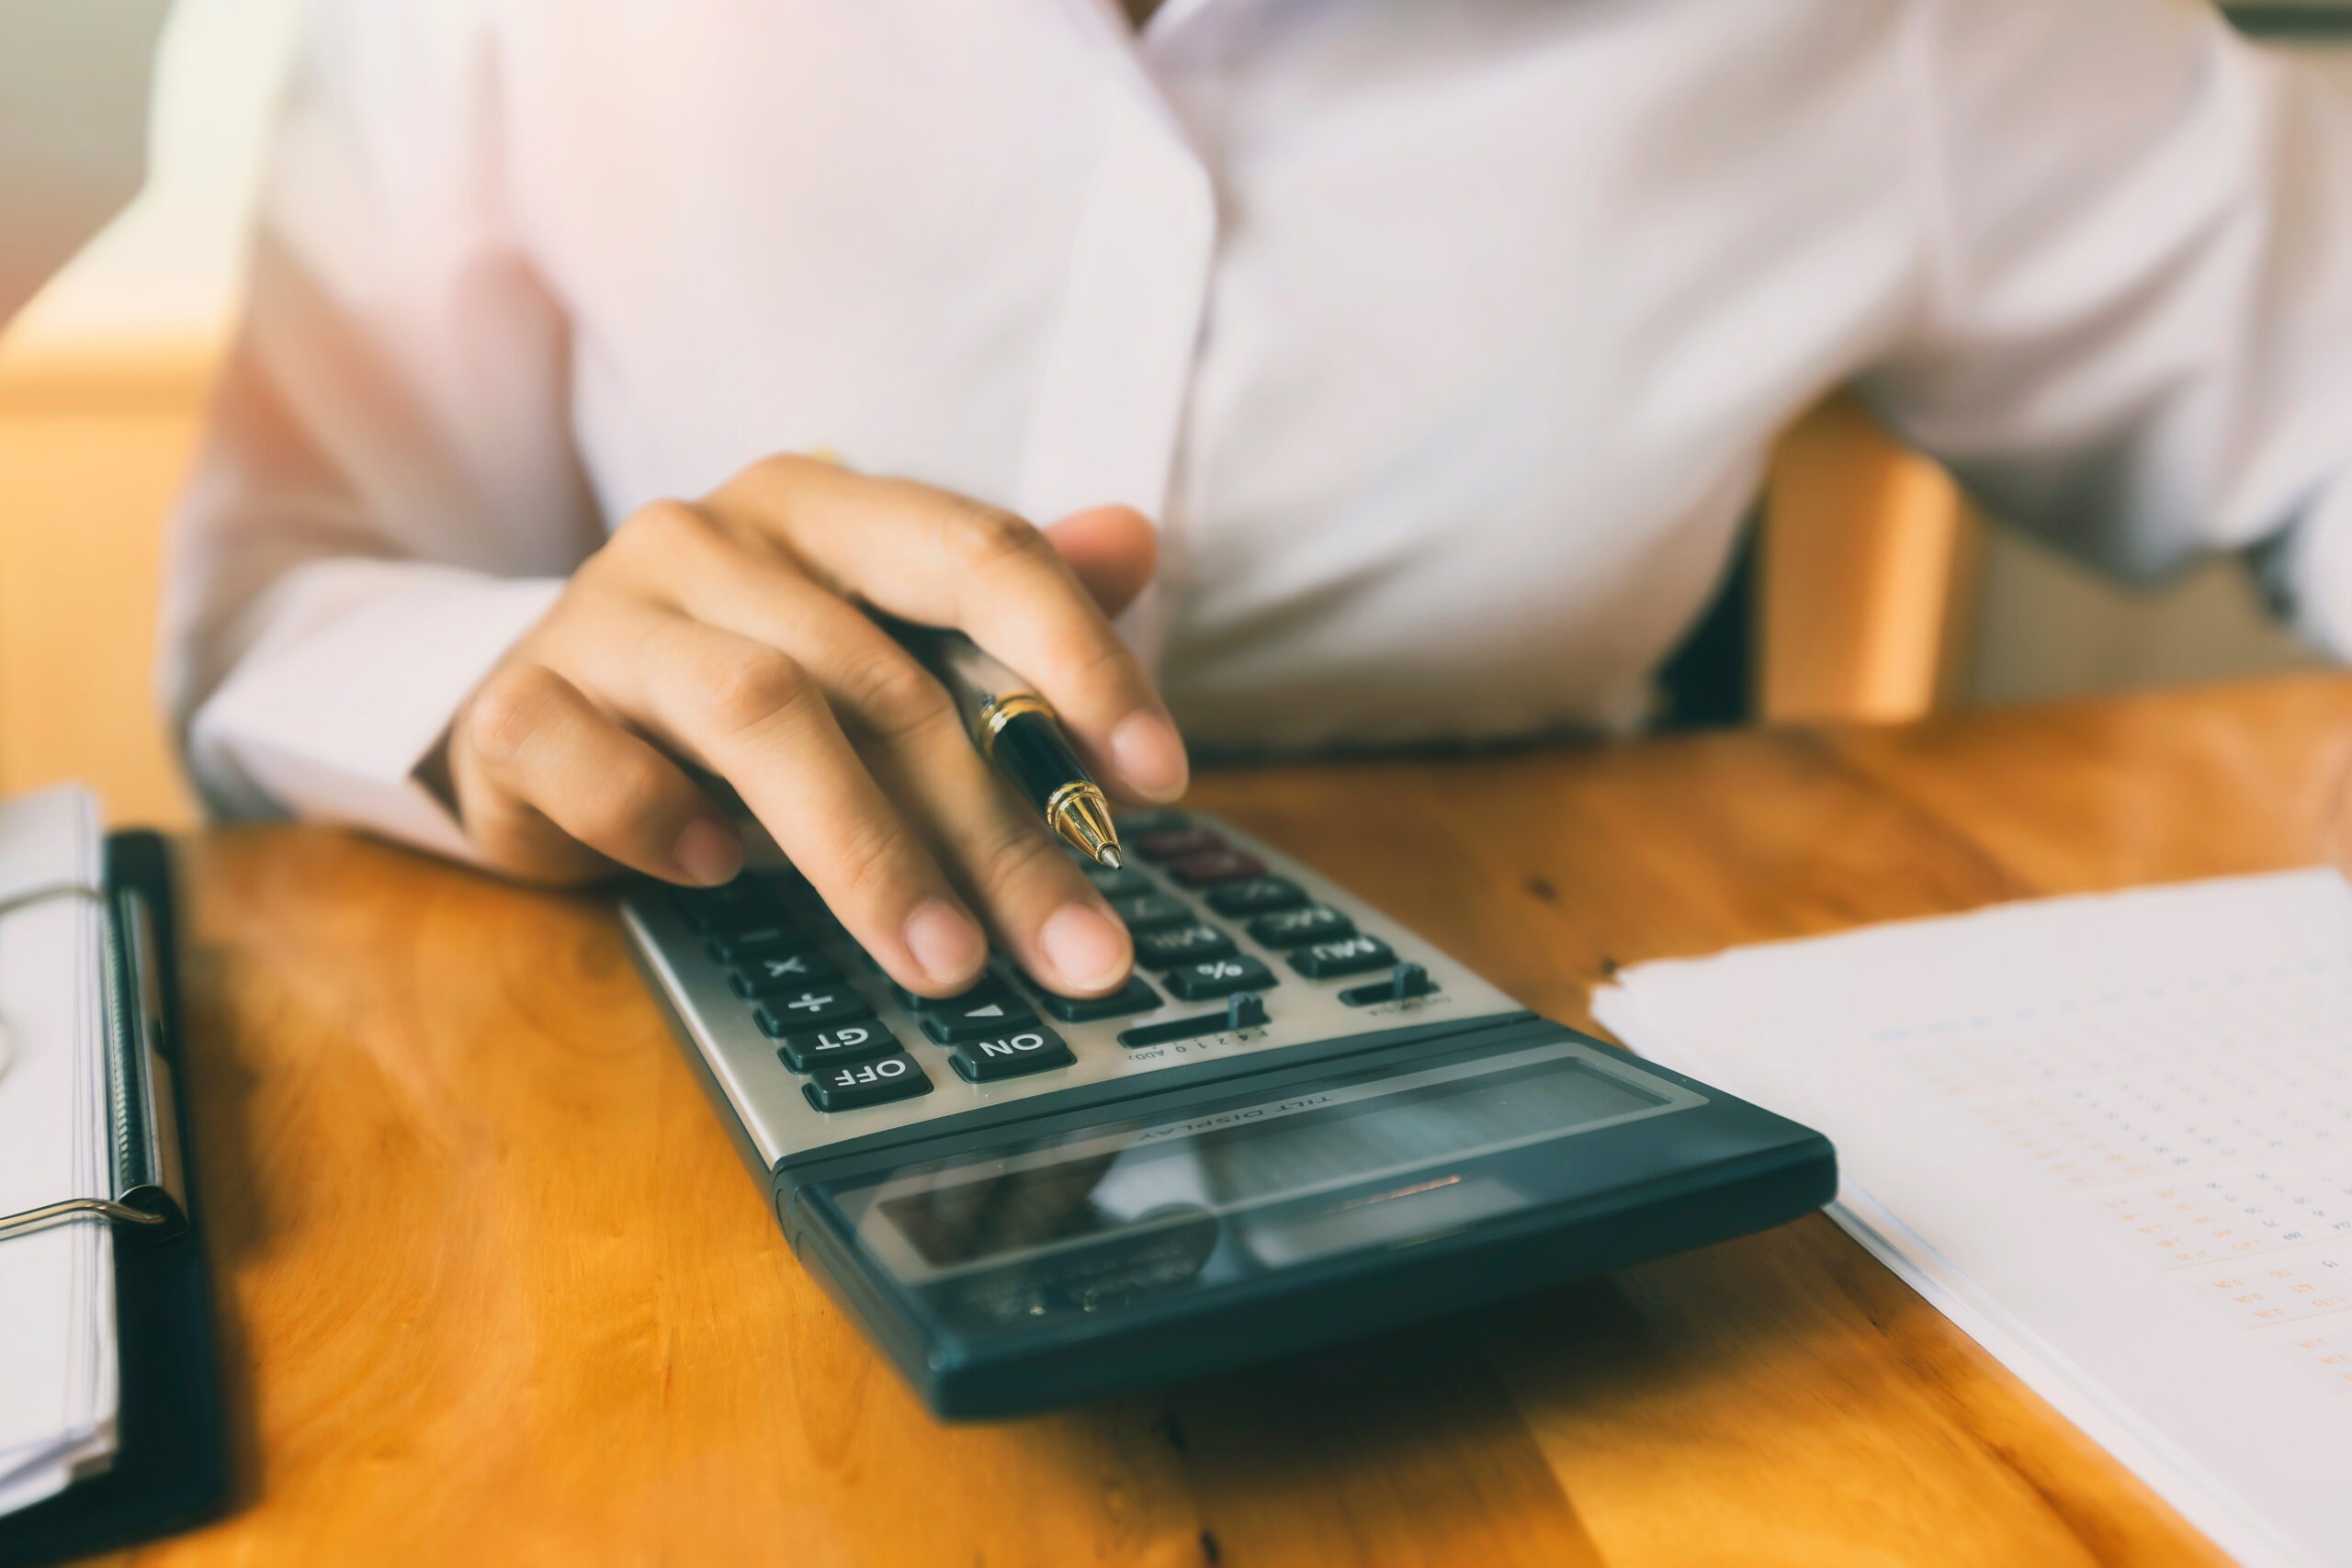 A person in a white shirt using a calculator on a wooden desk with paperwork nearby, possibly managing finances or performing fraudulent accounting tasks.